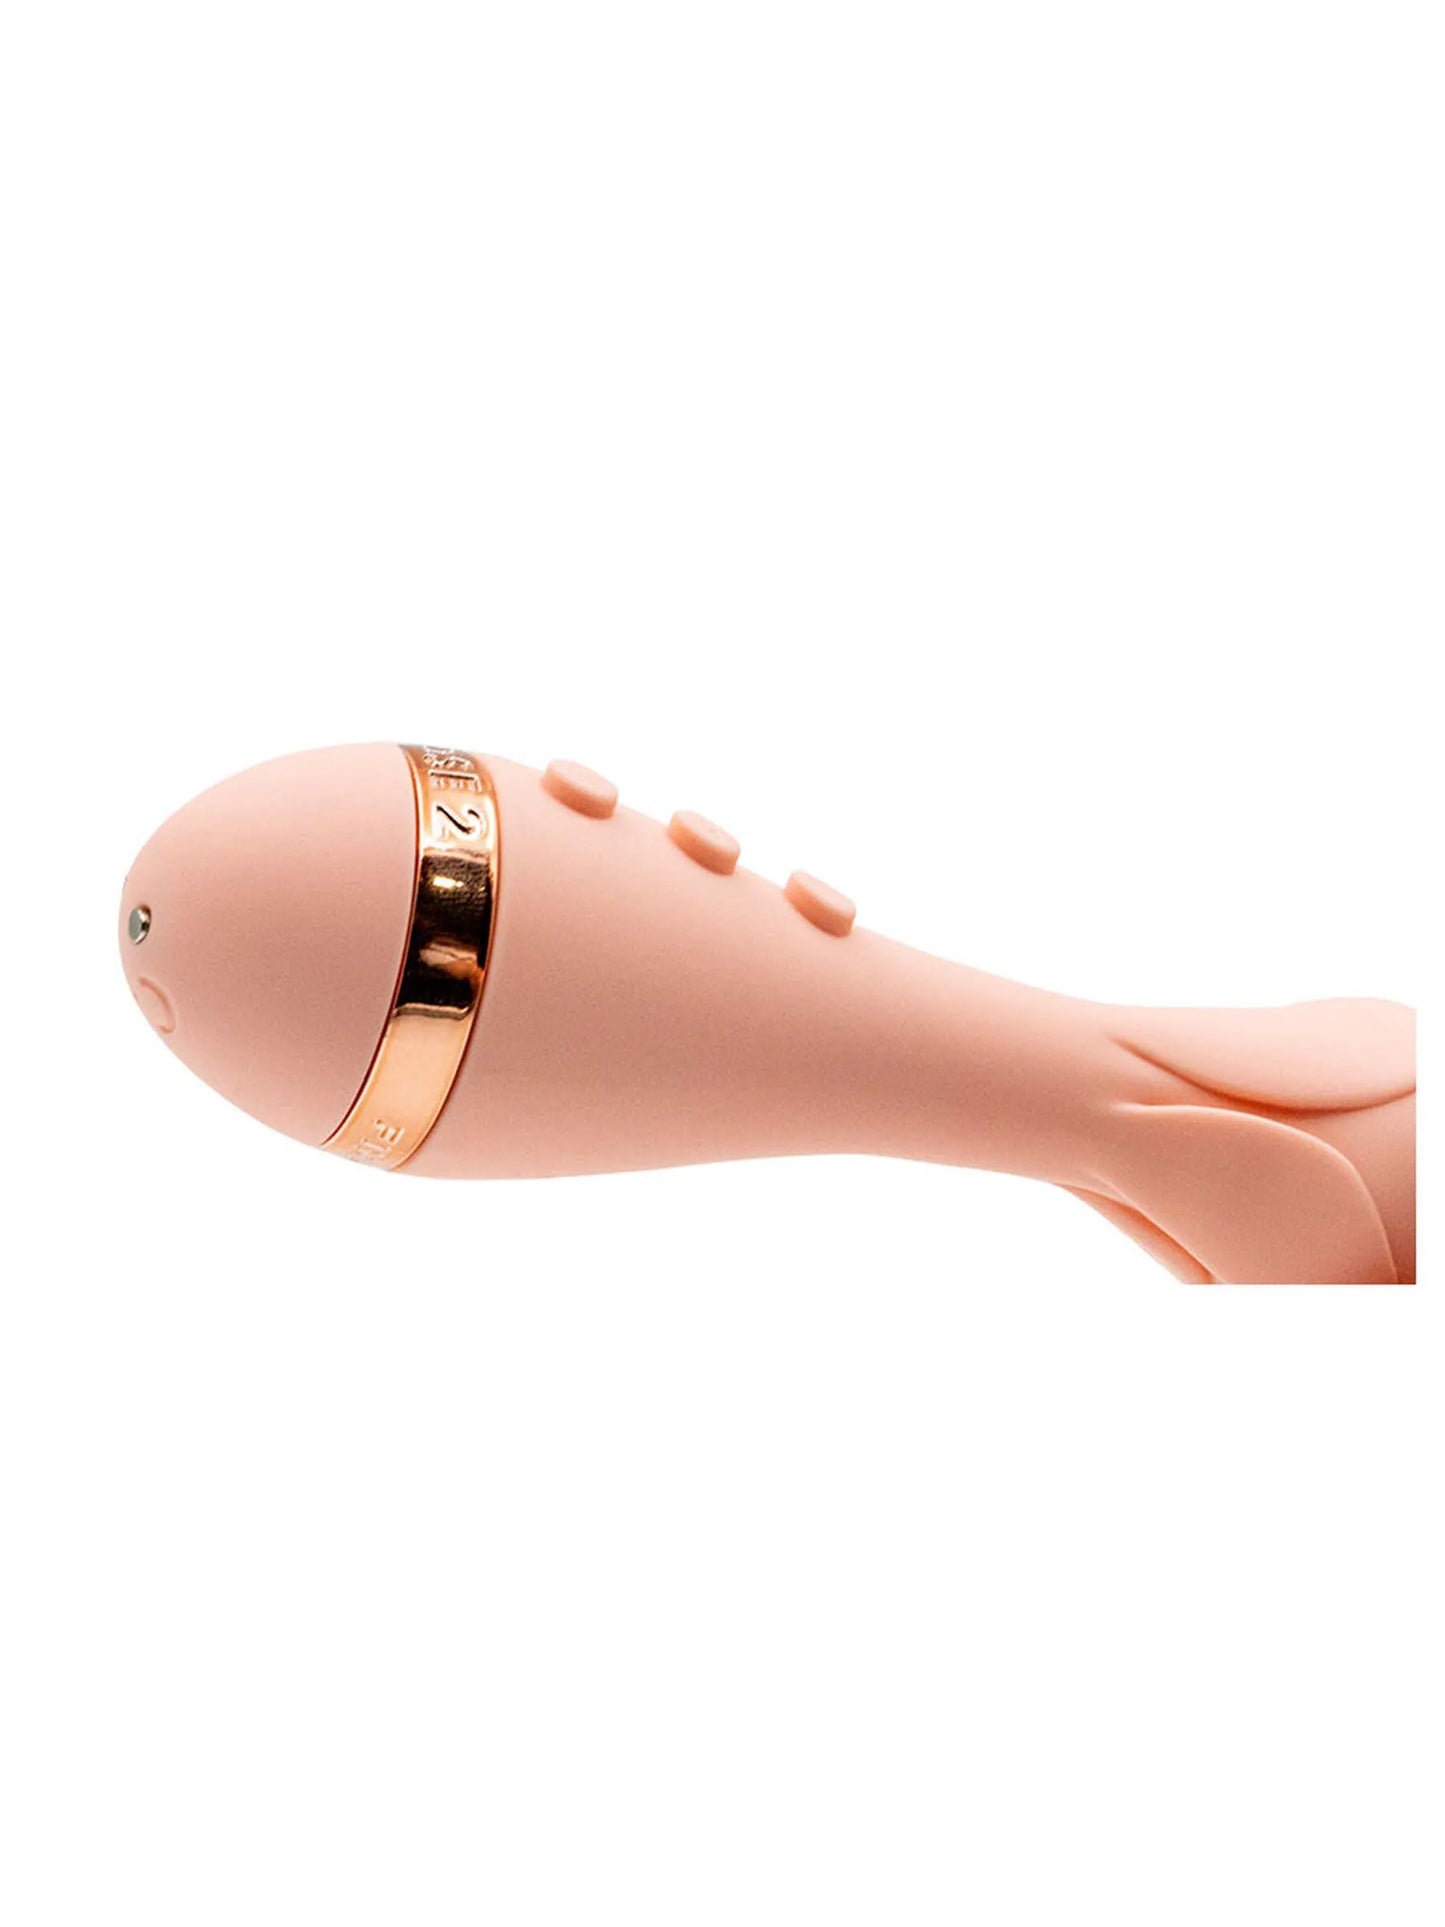 Vush Rose Clitoral Vibrator From Ann Summers, Image 08